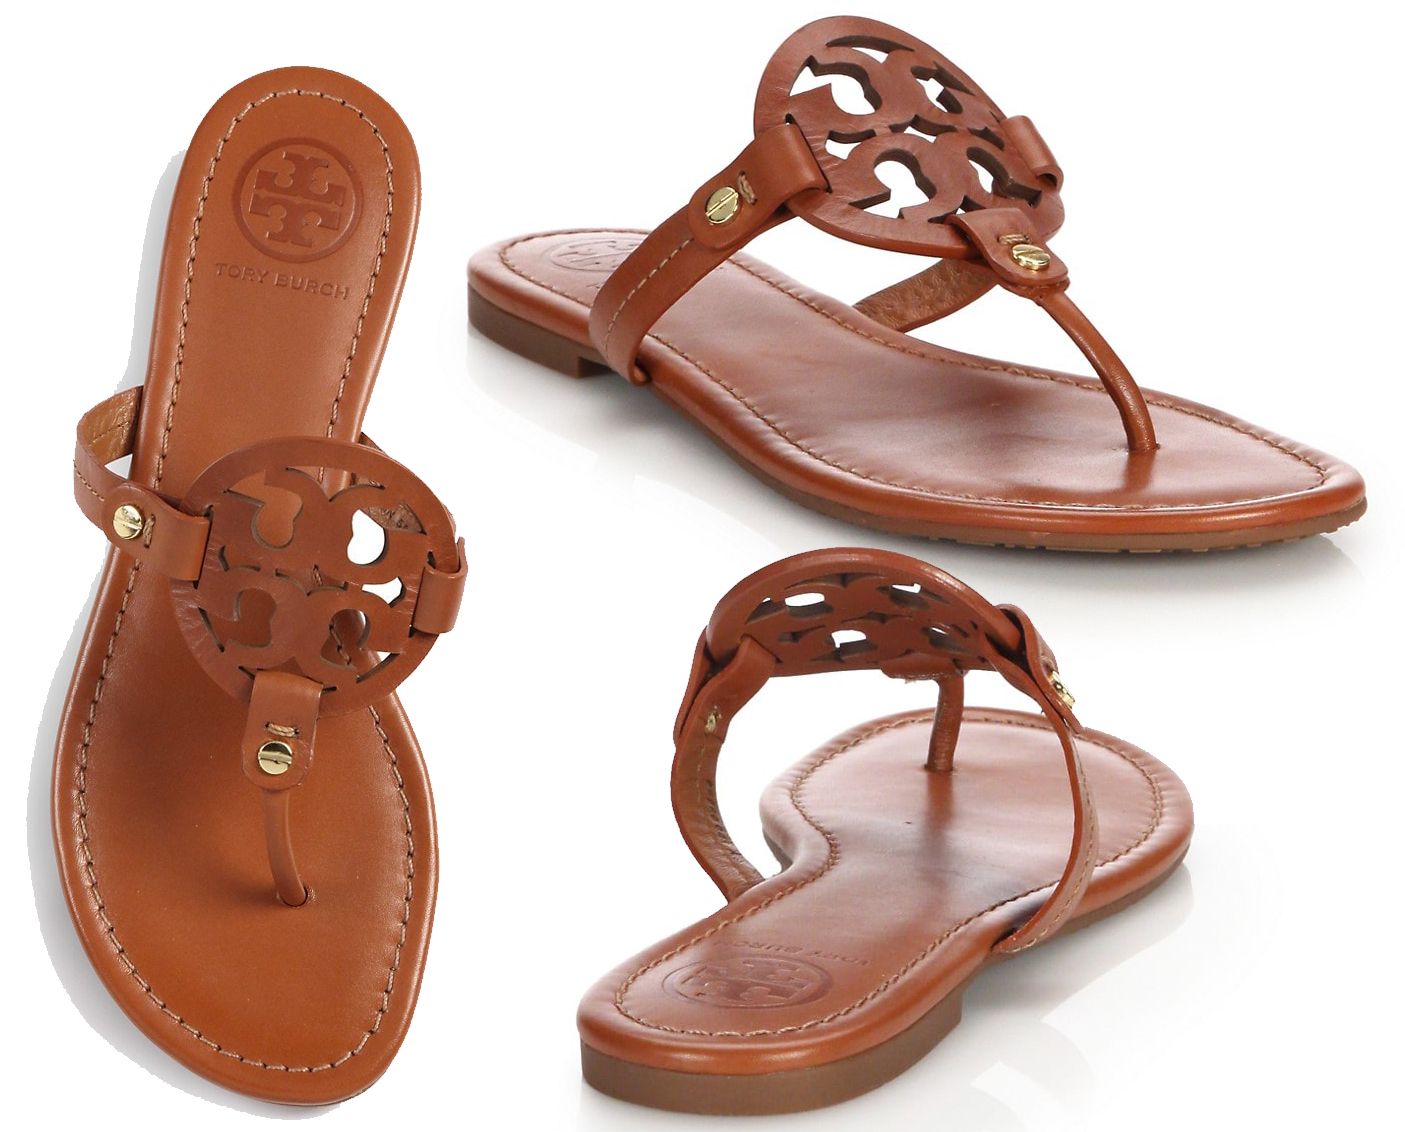 The Tory Burch Miller features a laser-cut logo vamp and comes in an array of neutral colors